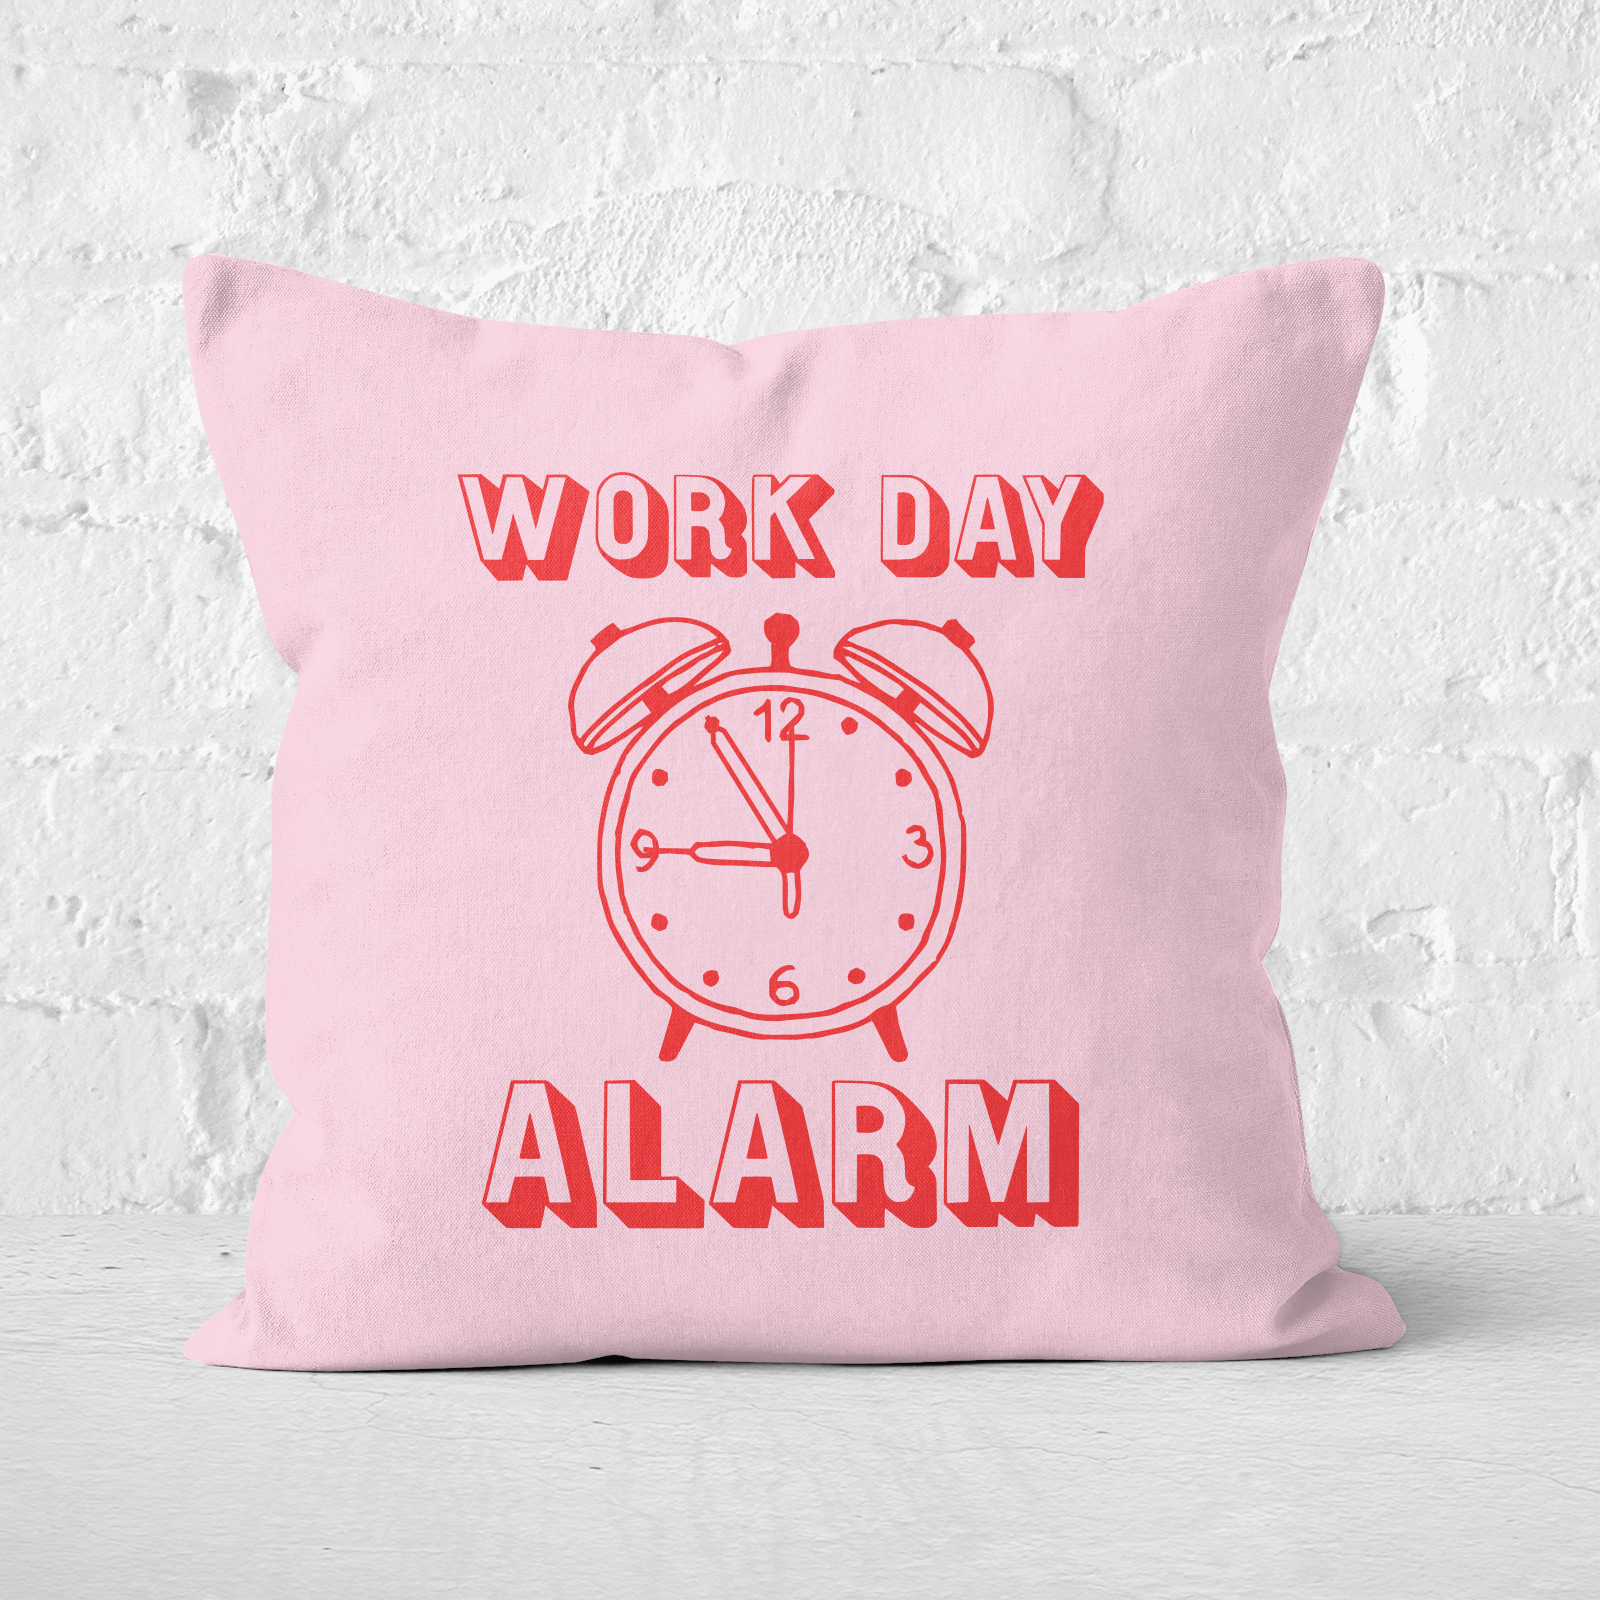 Work Day Alarm Square Cushion - 60x60cm - Soft Touch